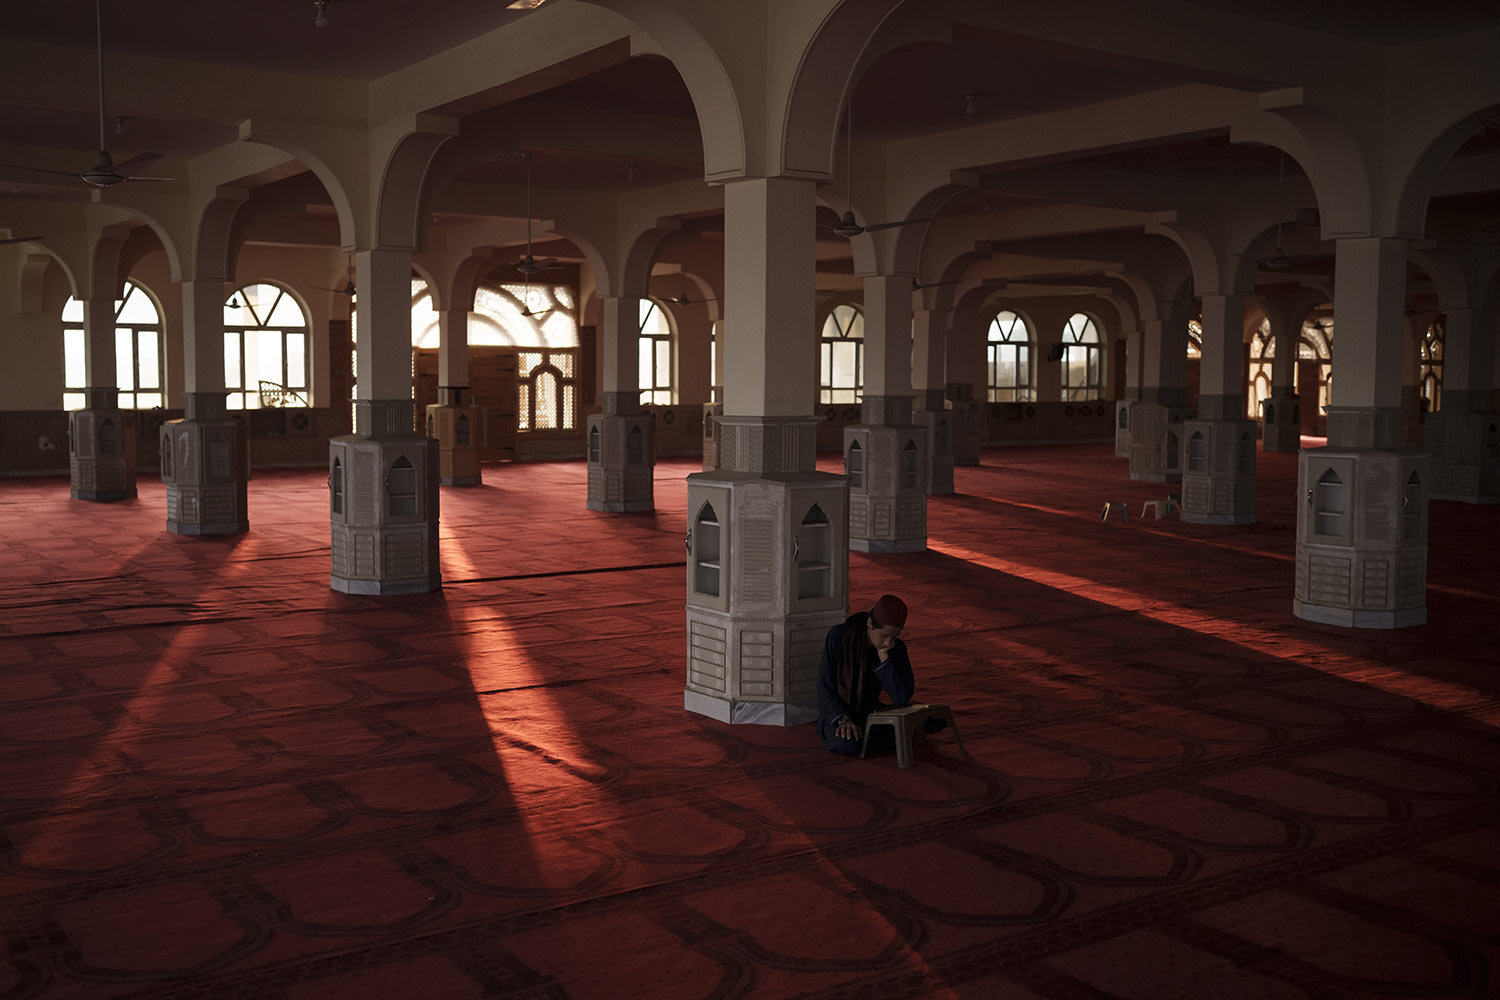 An Afghan student reads the Quran, Islam's holy book, at the mosque of the Khatamul Anbiya madrasa in Kabul, Afghanistan, Wednesday, Sept. 29, 2021. (AP Photo/Felipe Dana)